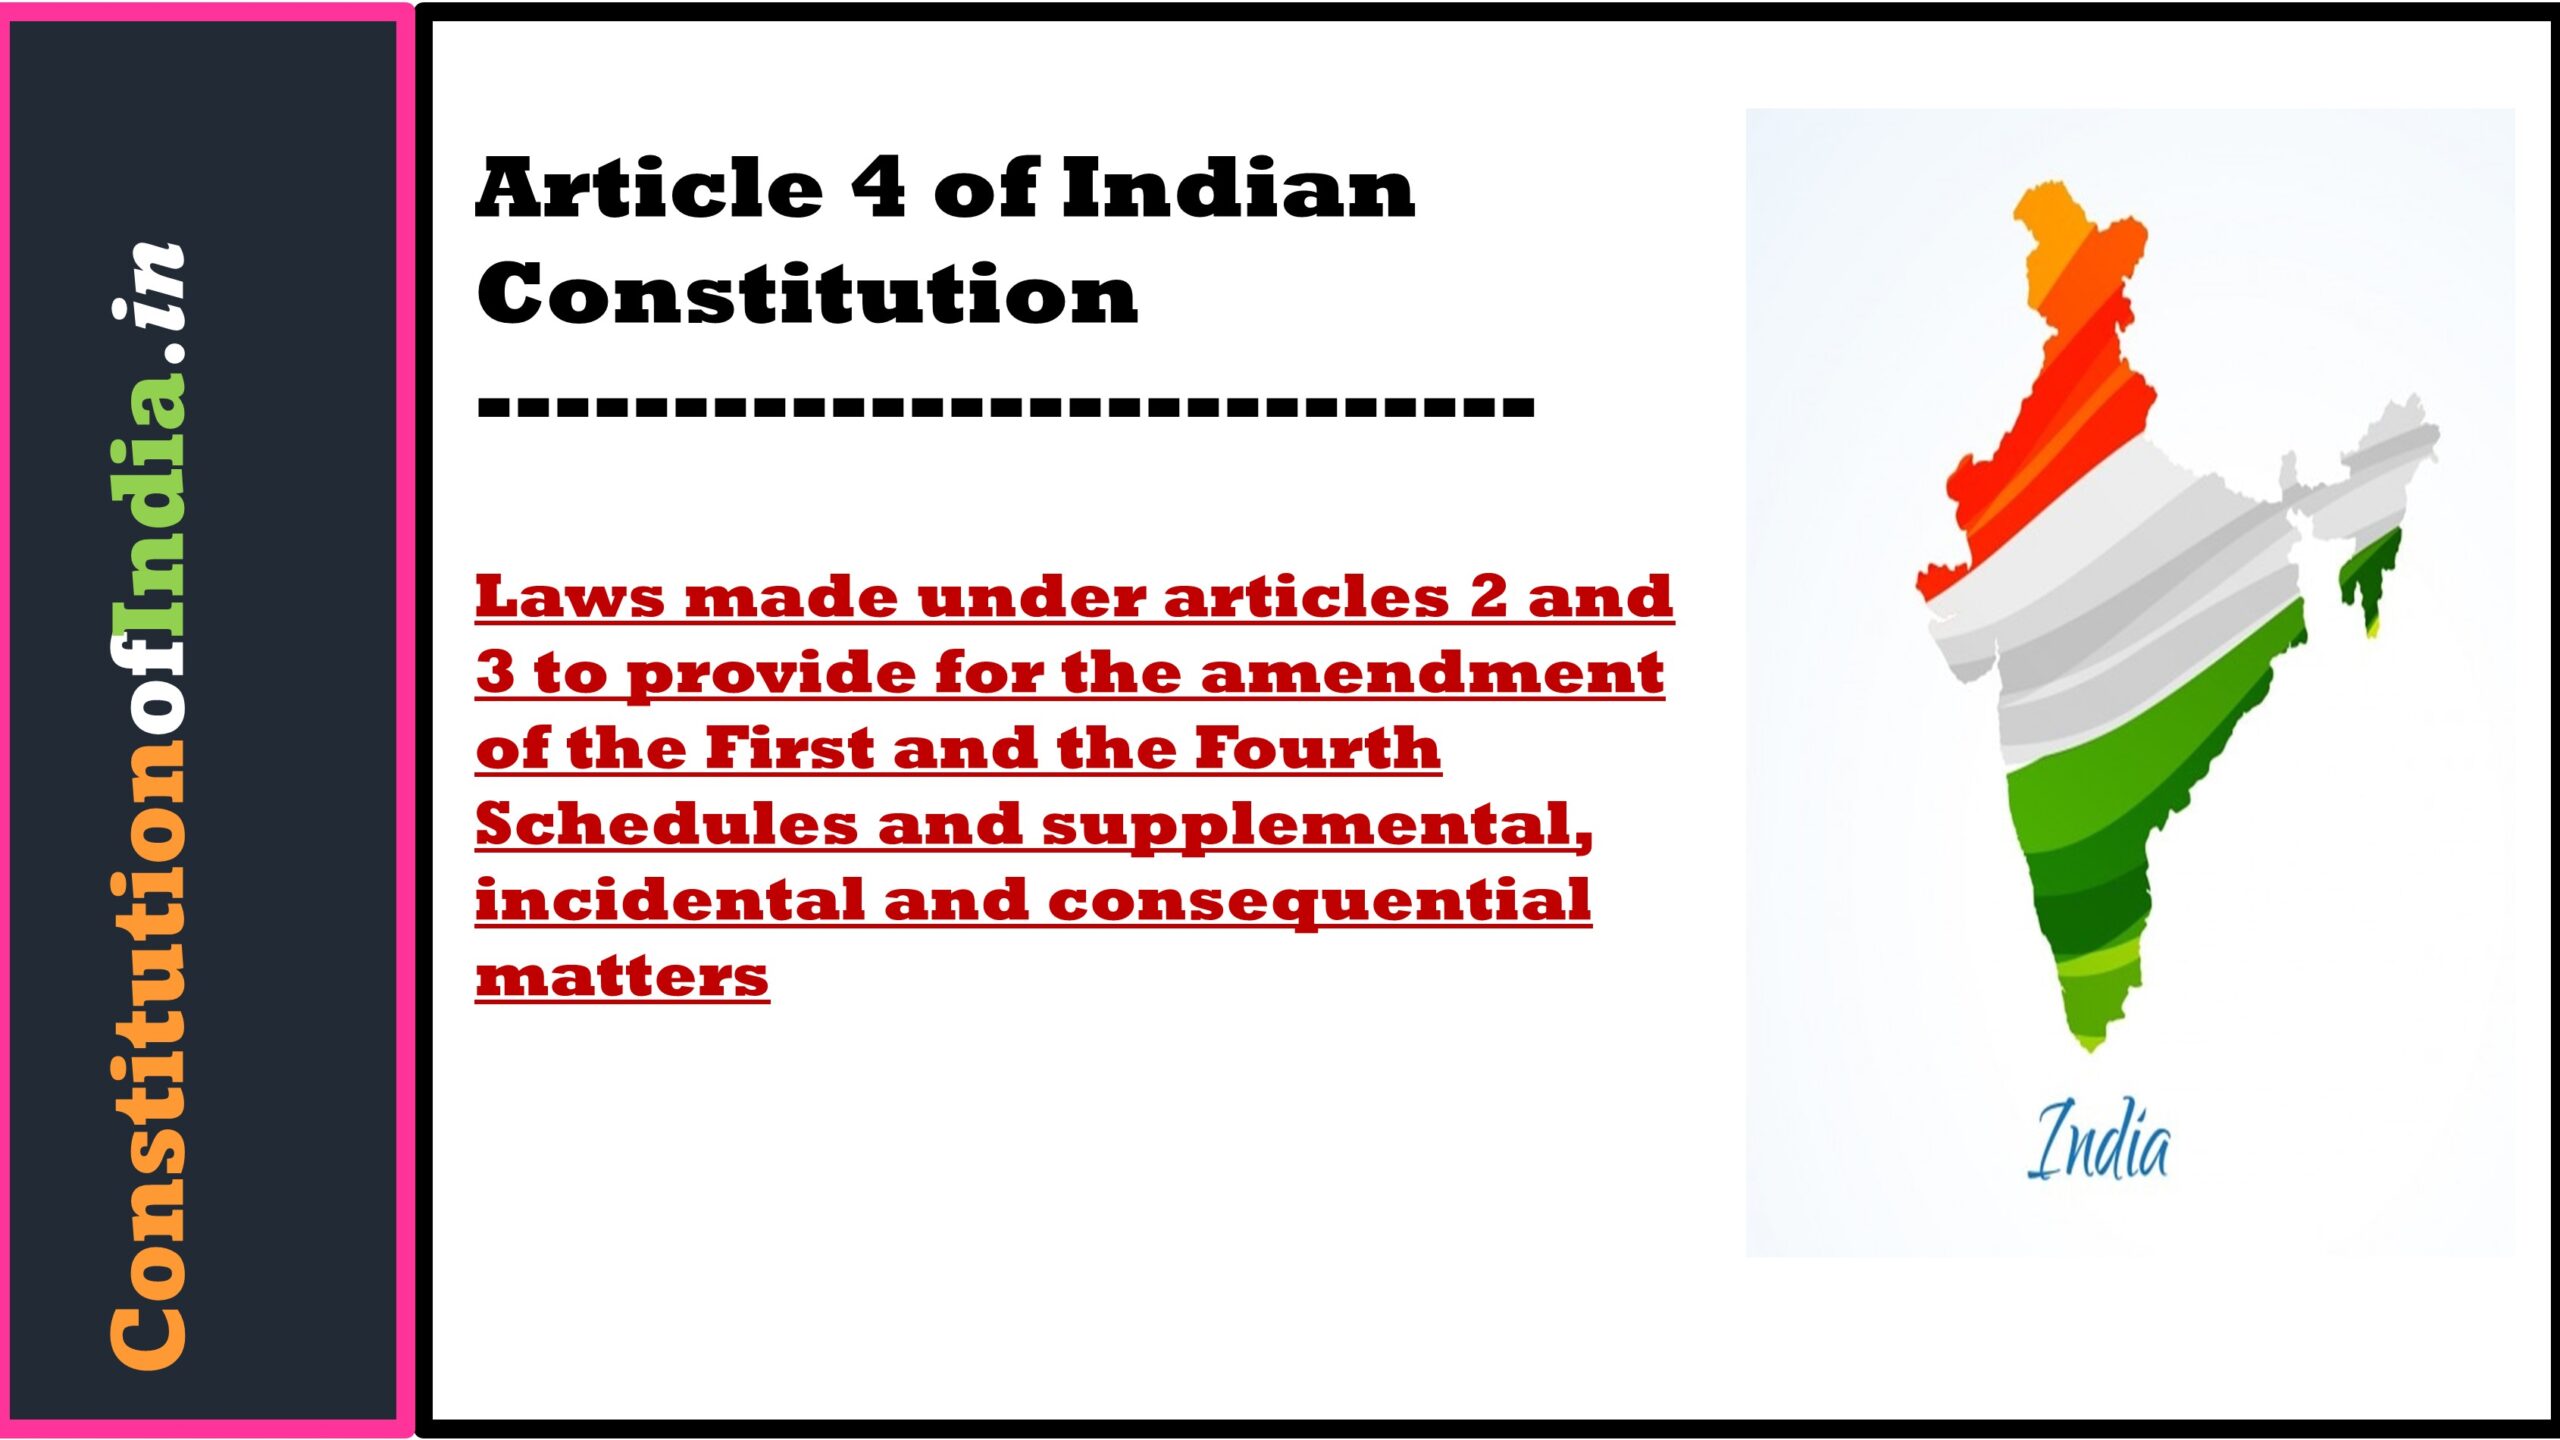 Article 4 of Indian Constitution